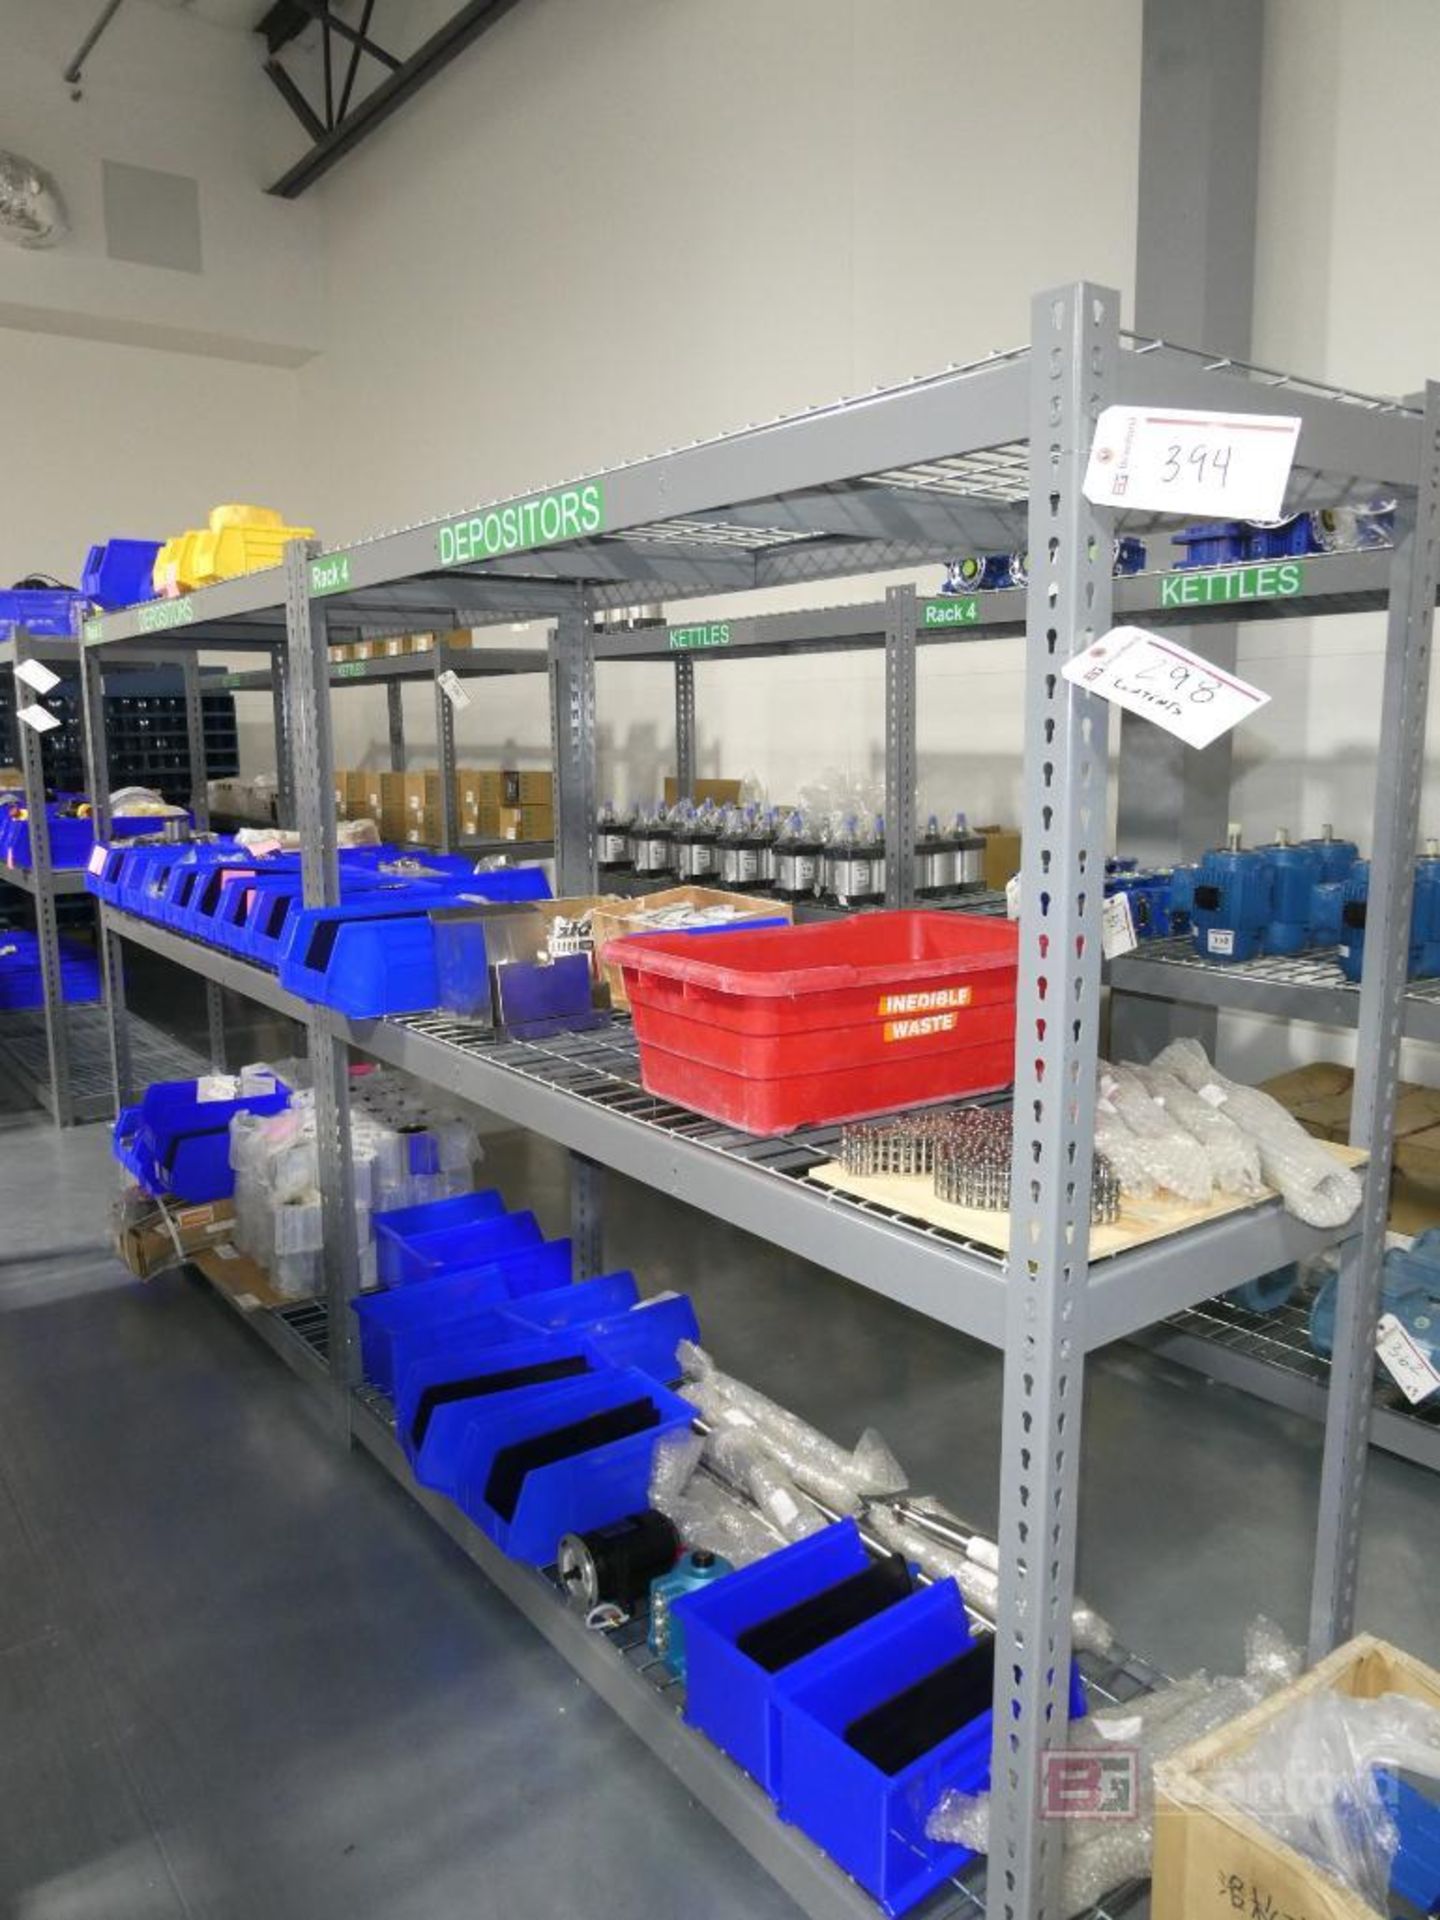 (2) Racks of Depositor Machine Parts and Accessories (Racks not Included)